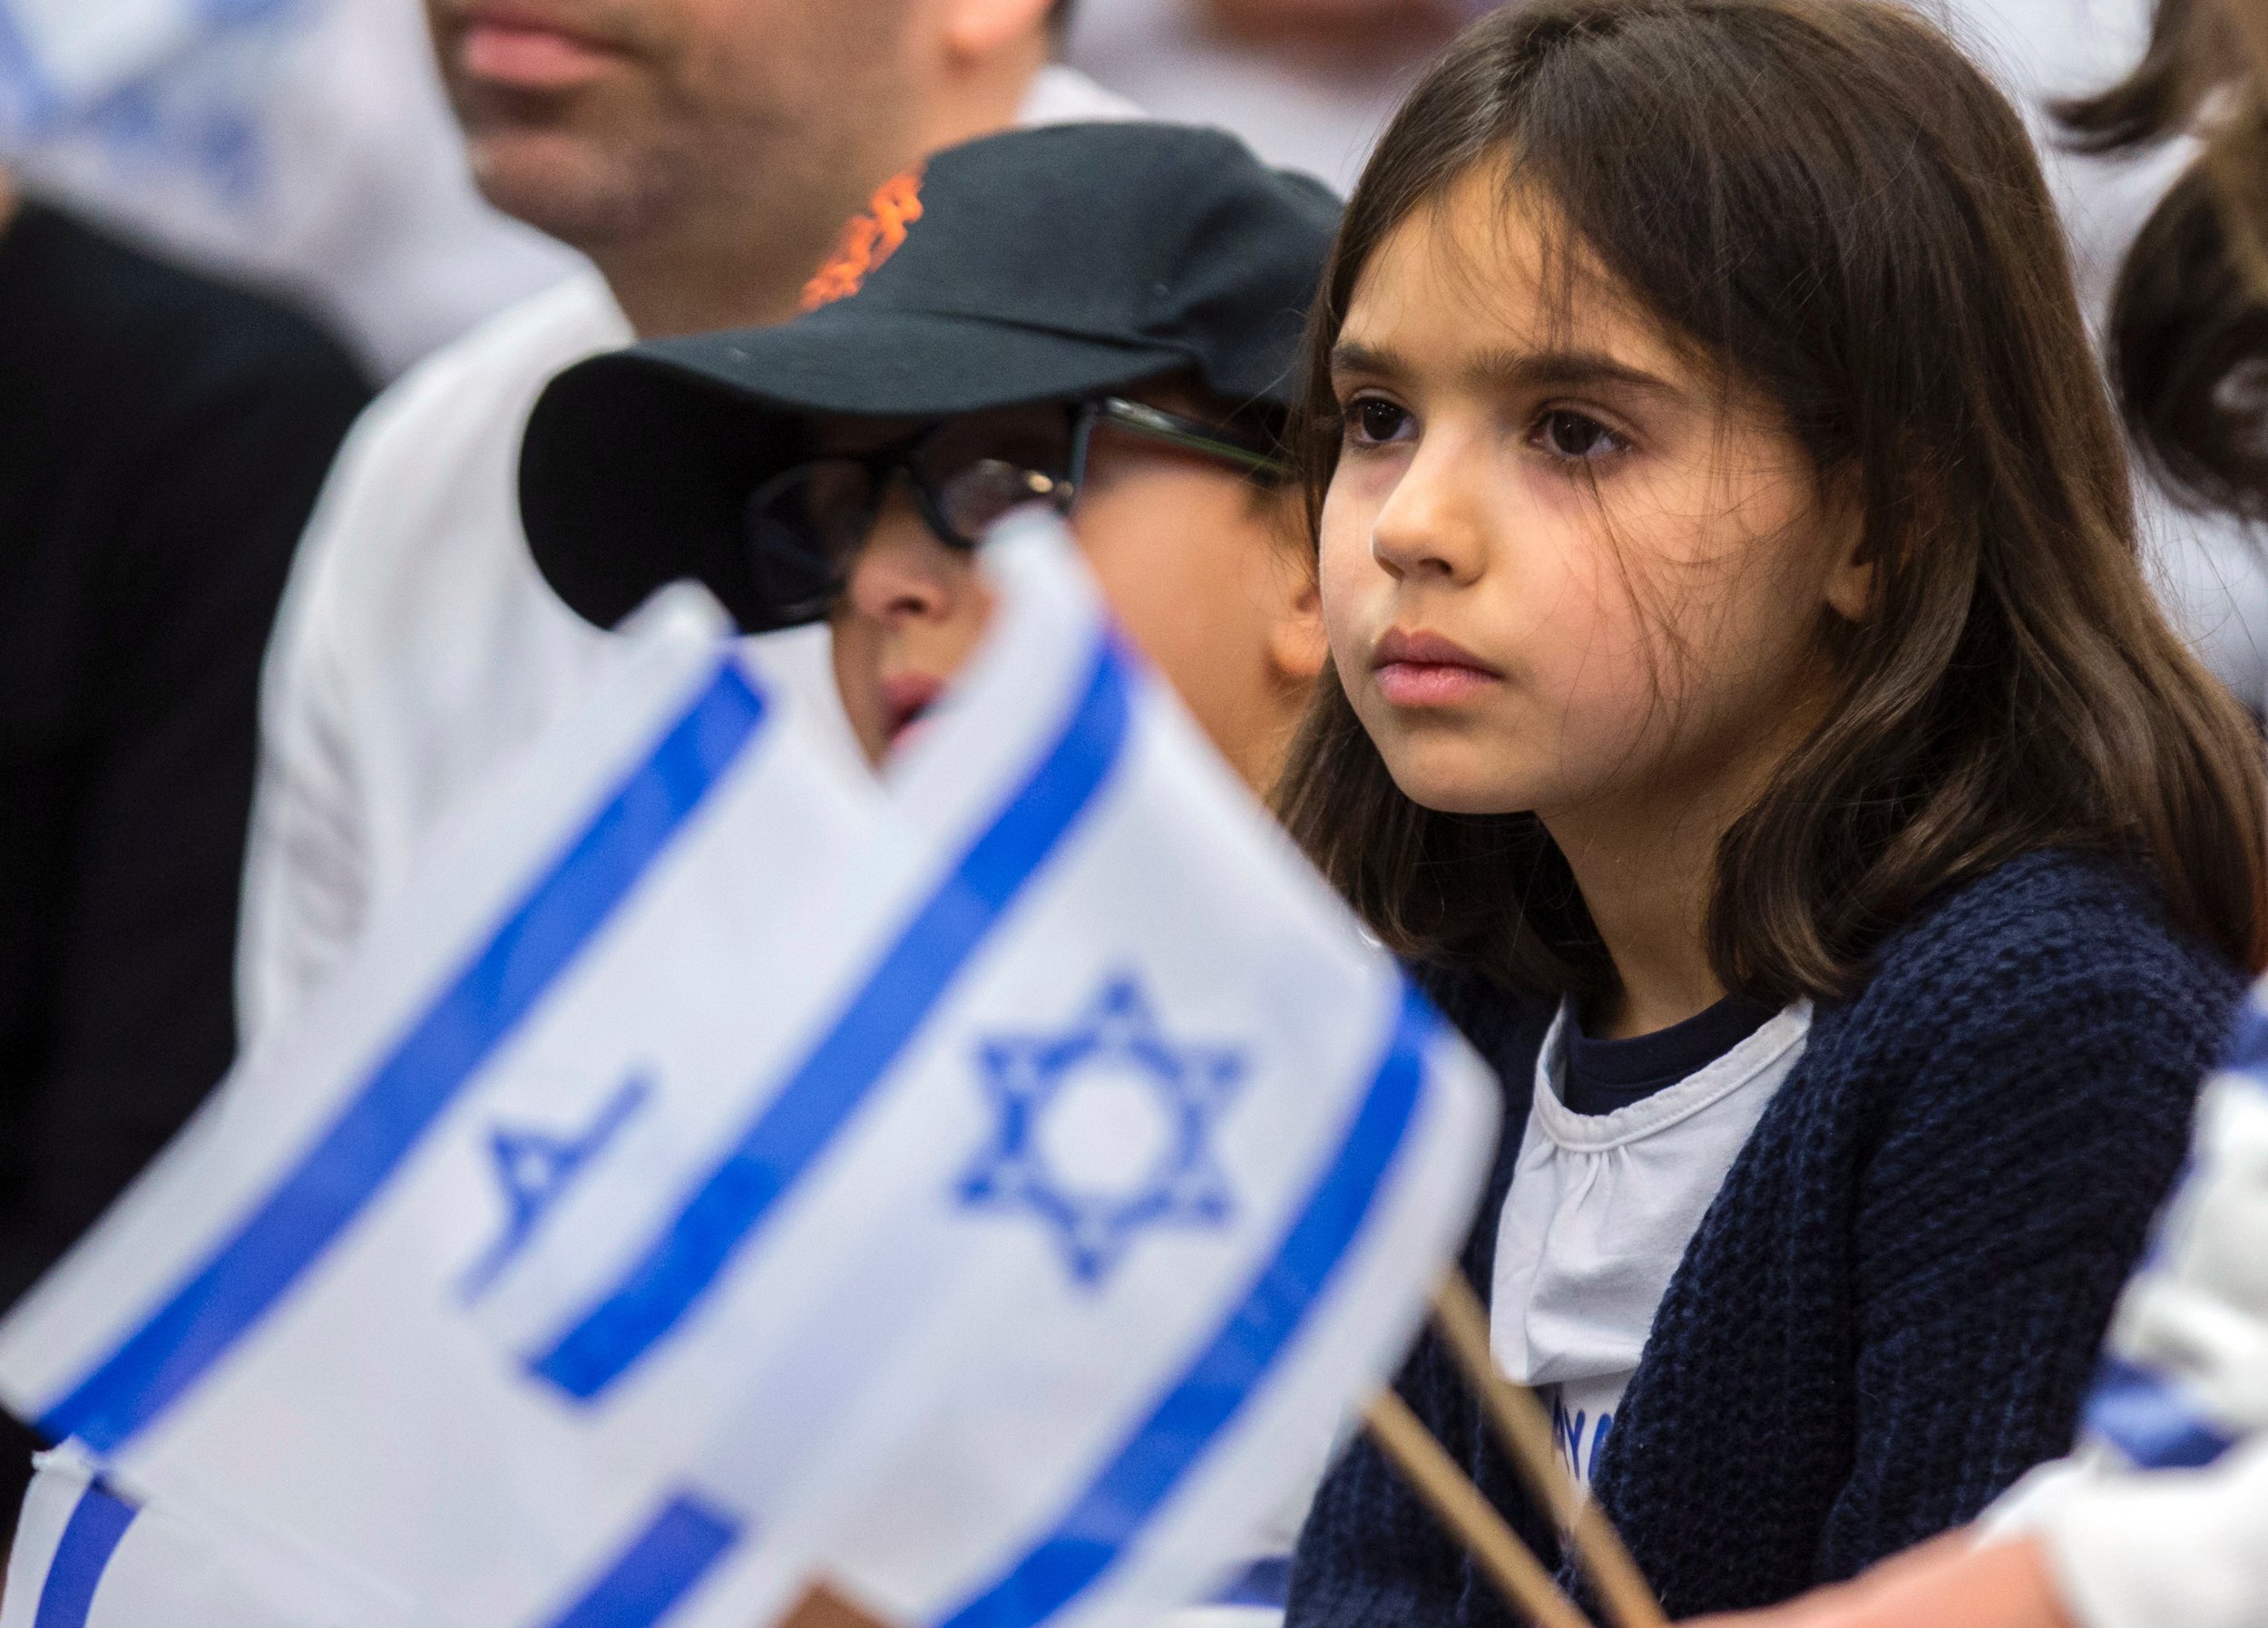 French family makes aliyah to Israel